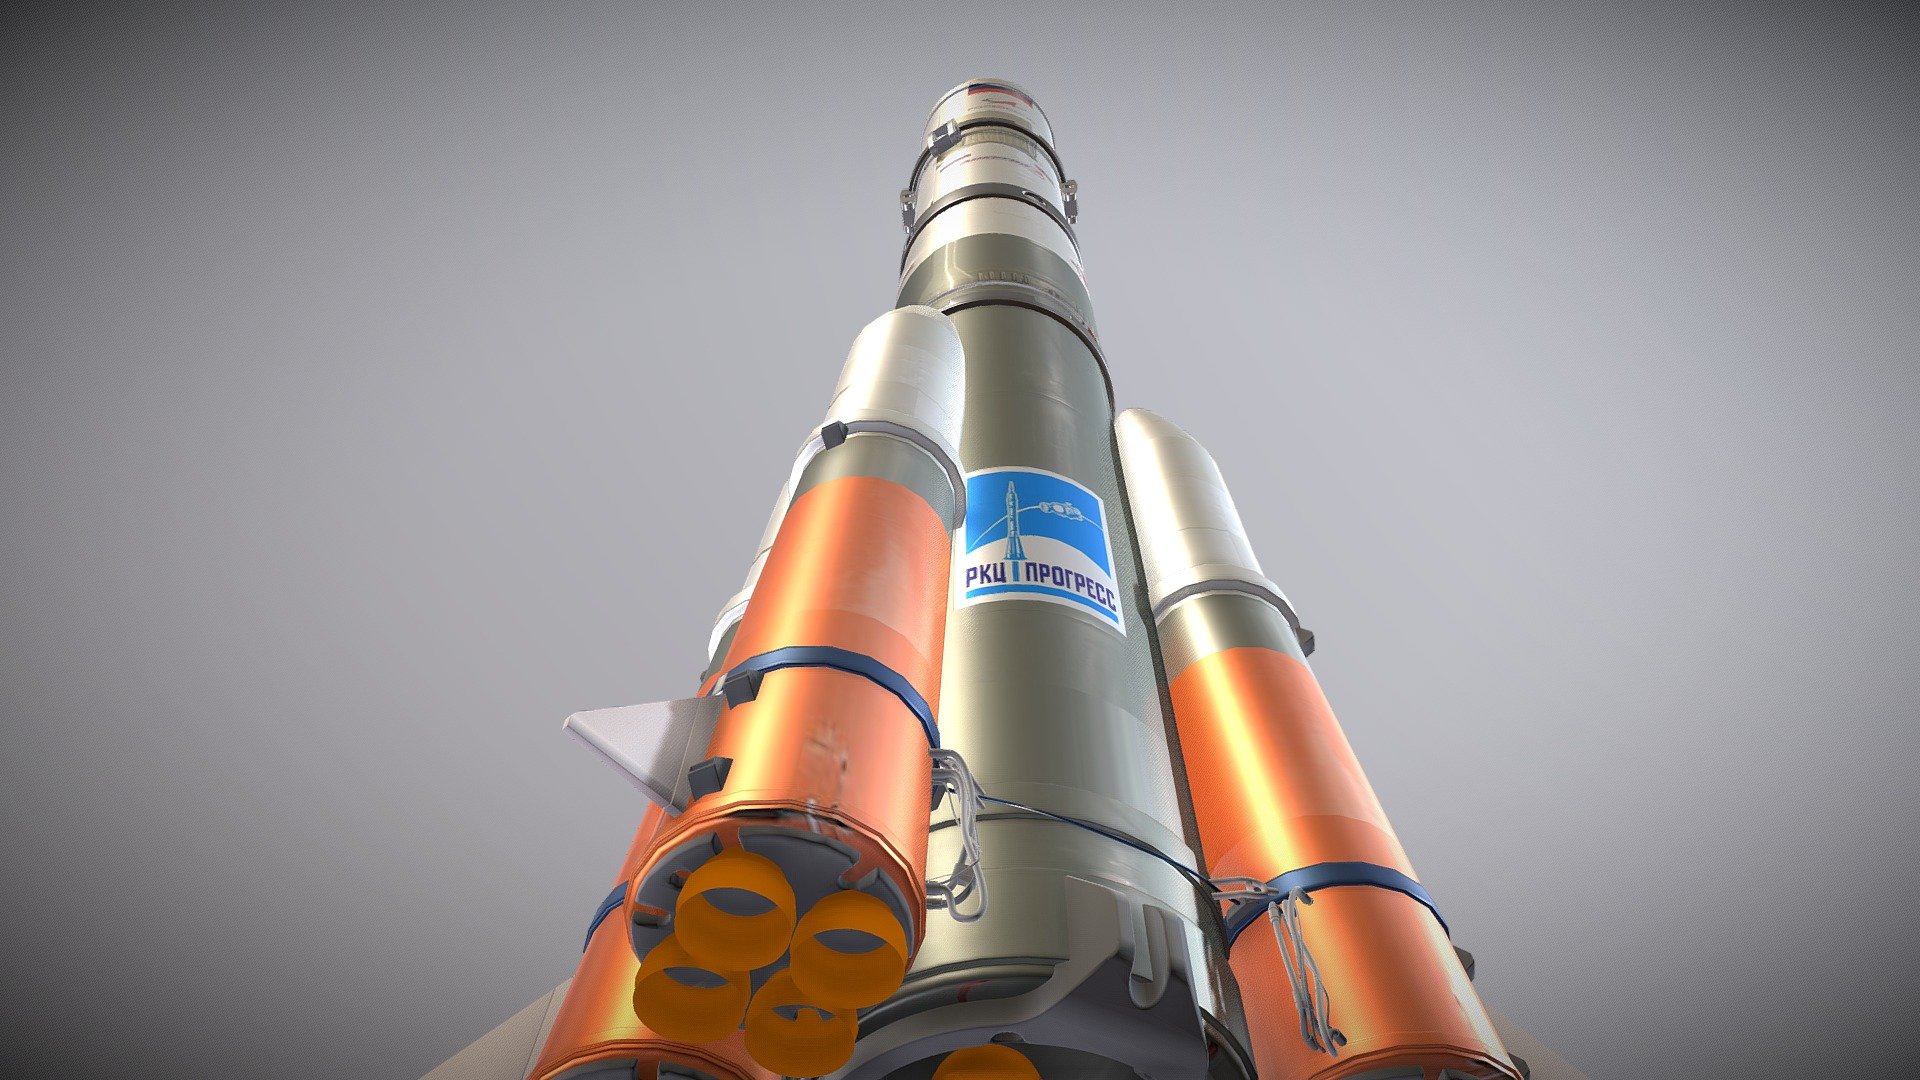 just a simple free to use rocket for any use 3d model